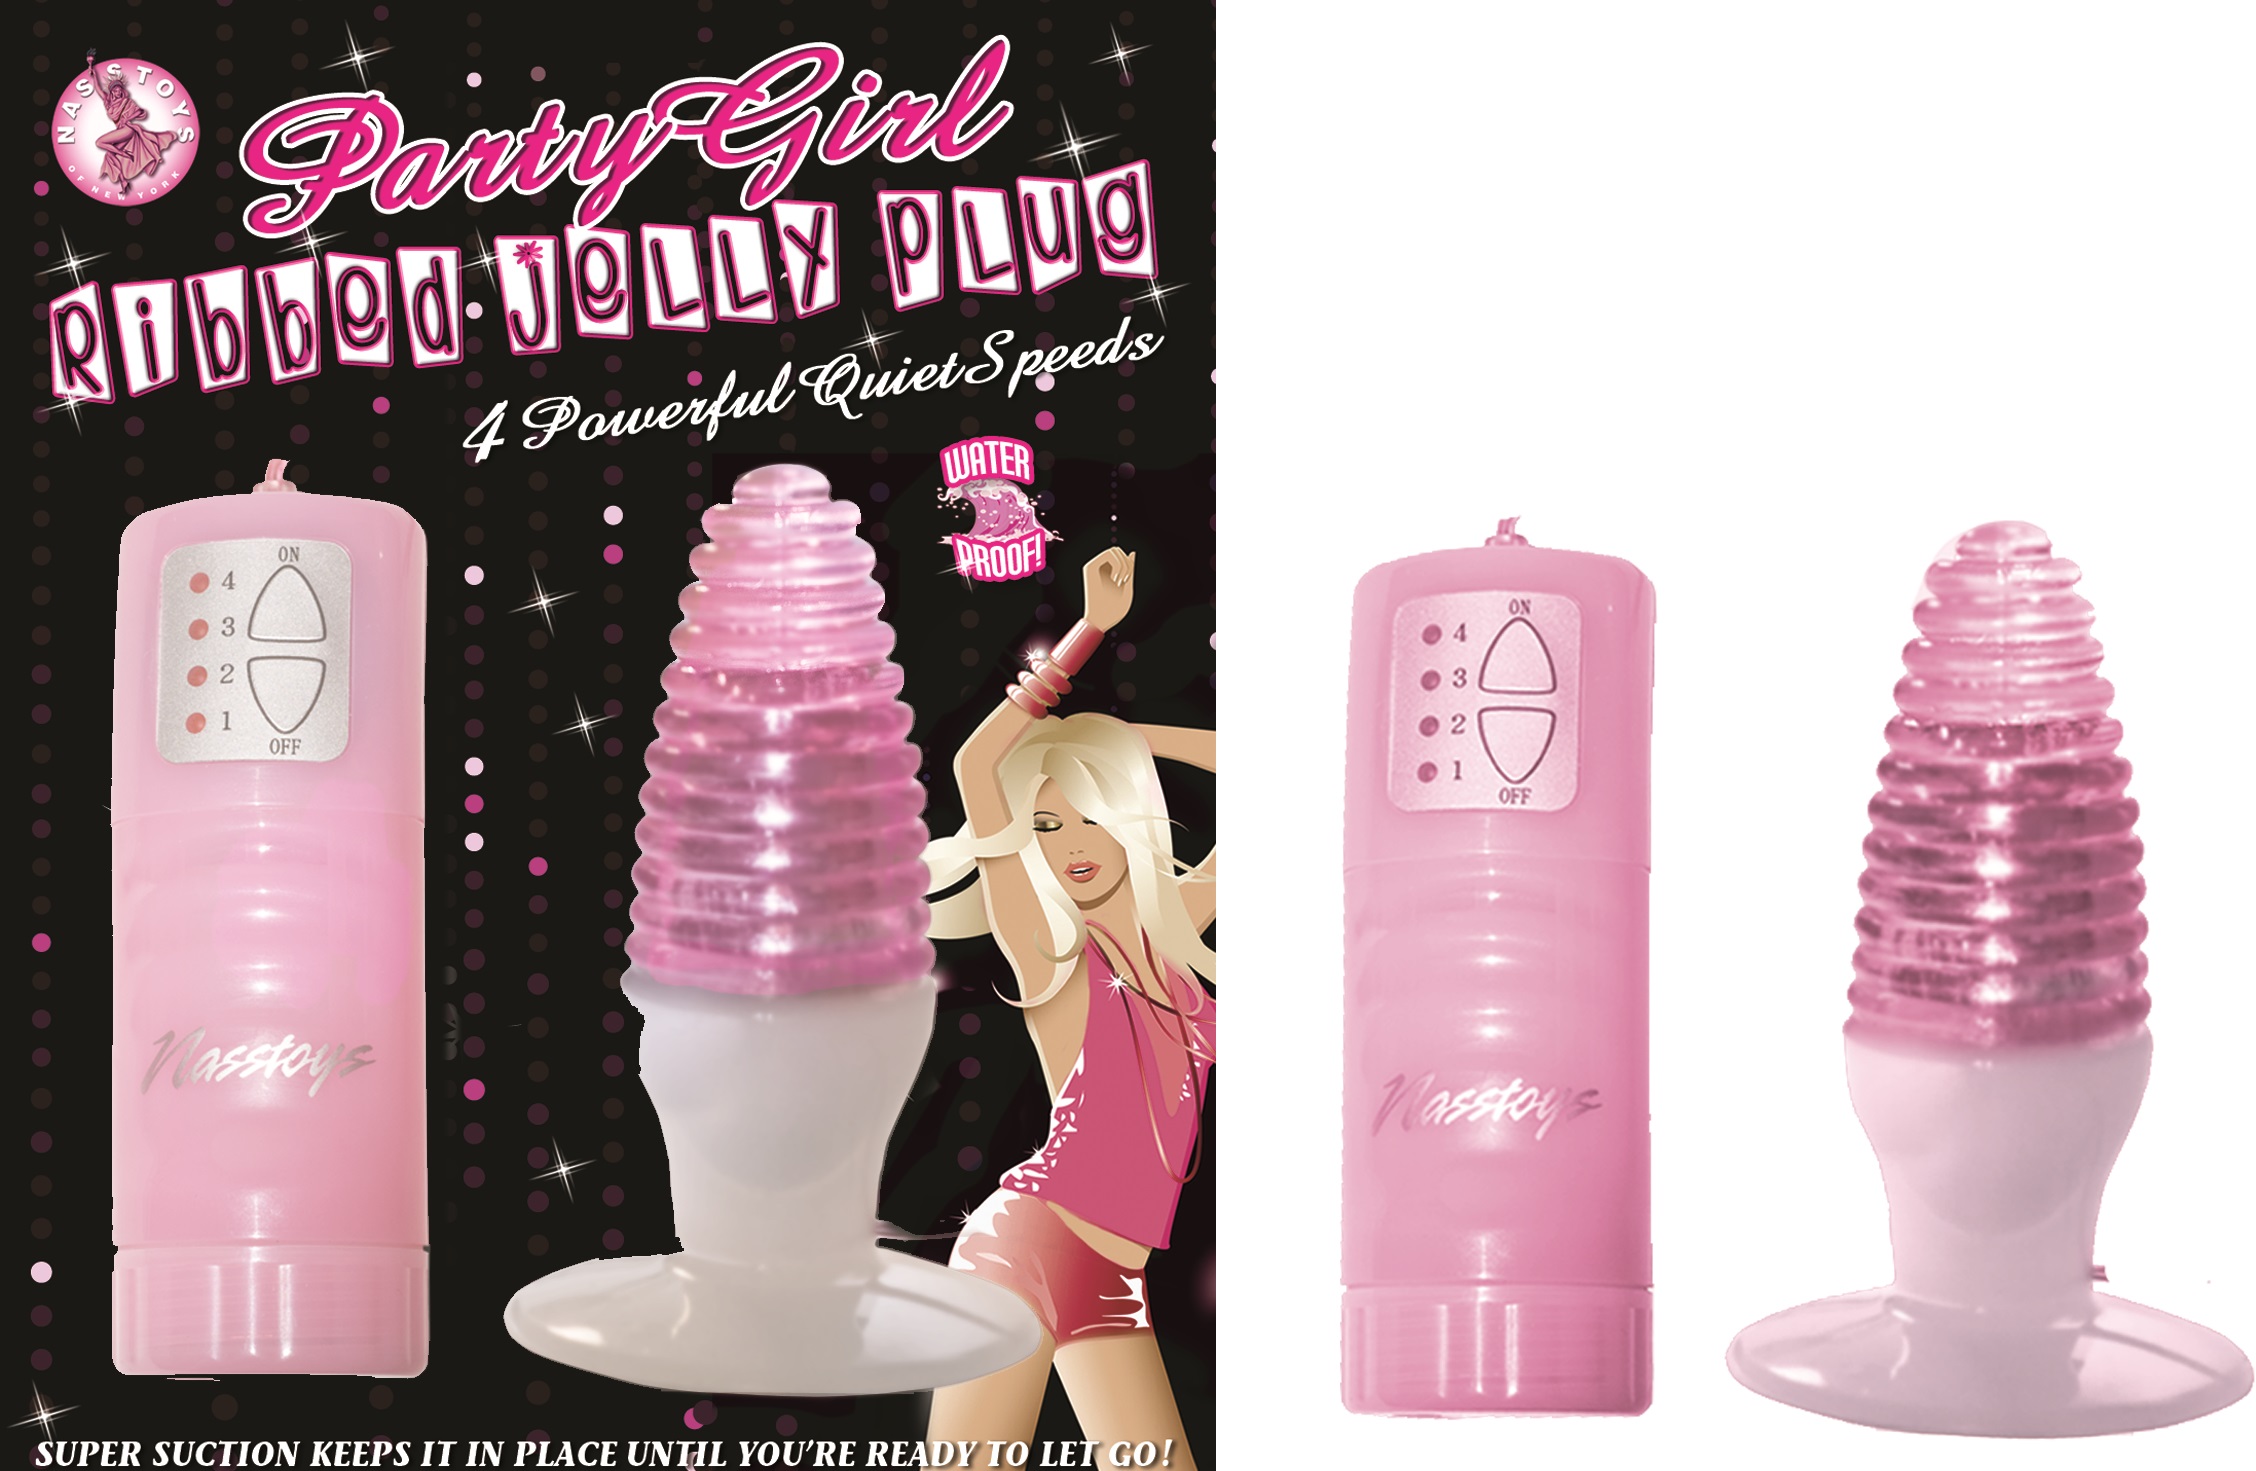 Party+Girl+Ribbed+Jelly+Plug+Waterproof